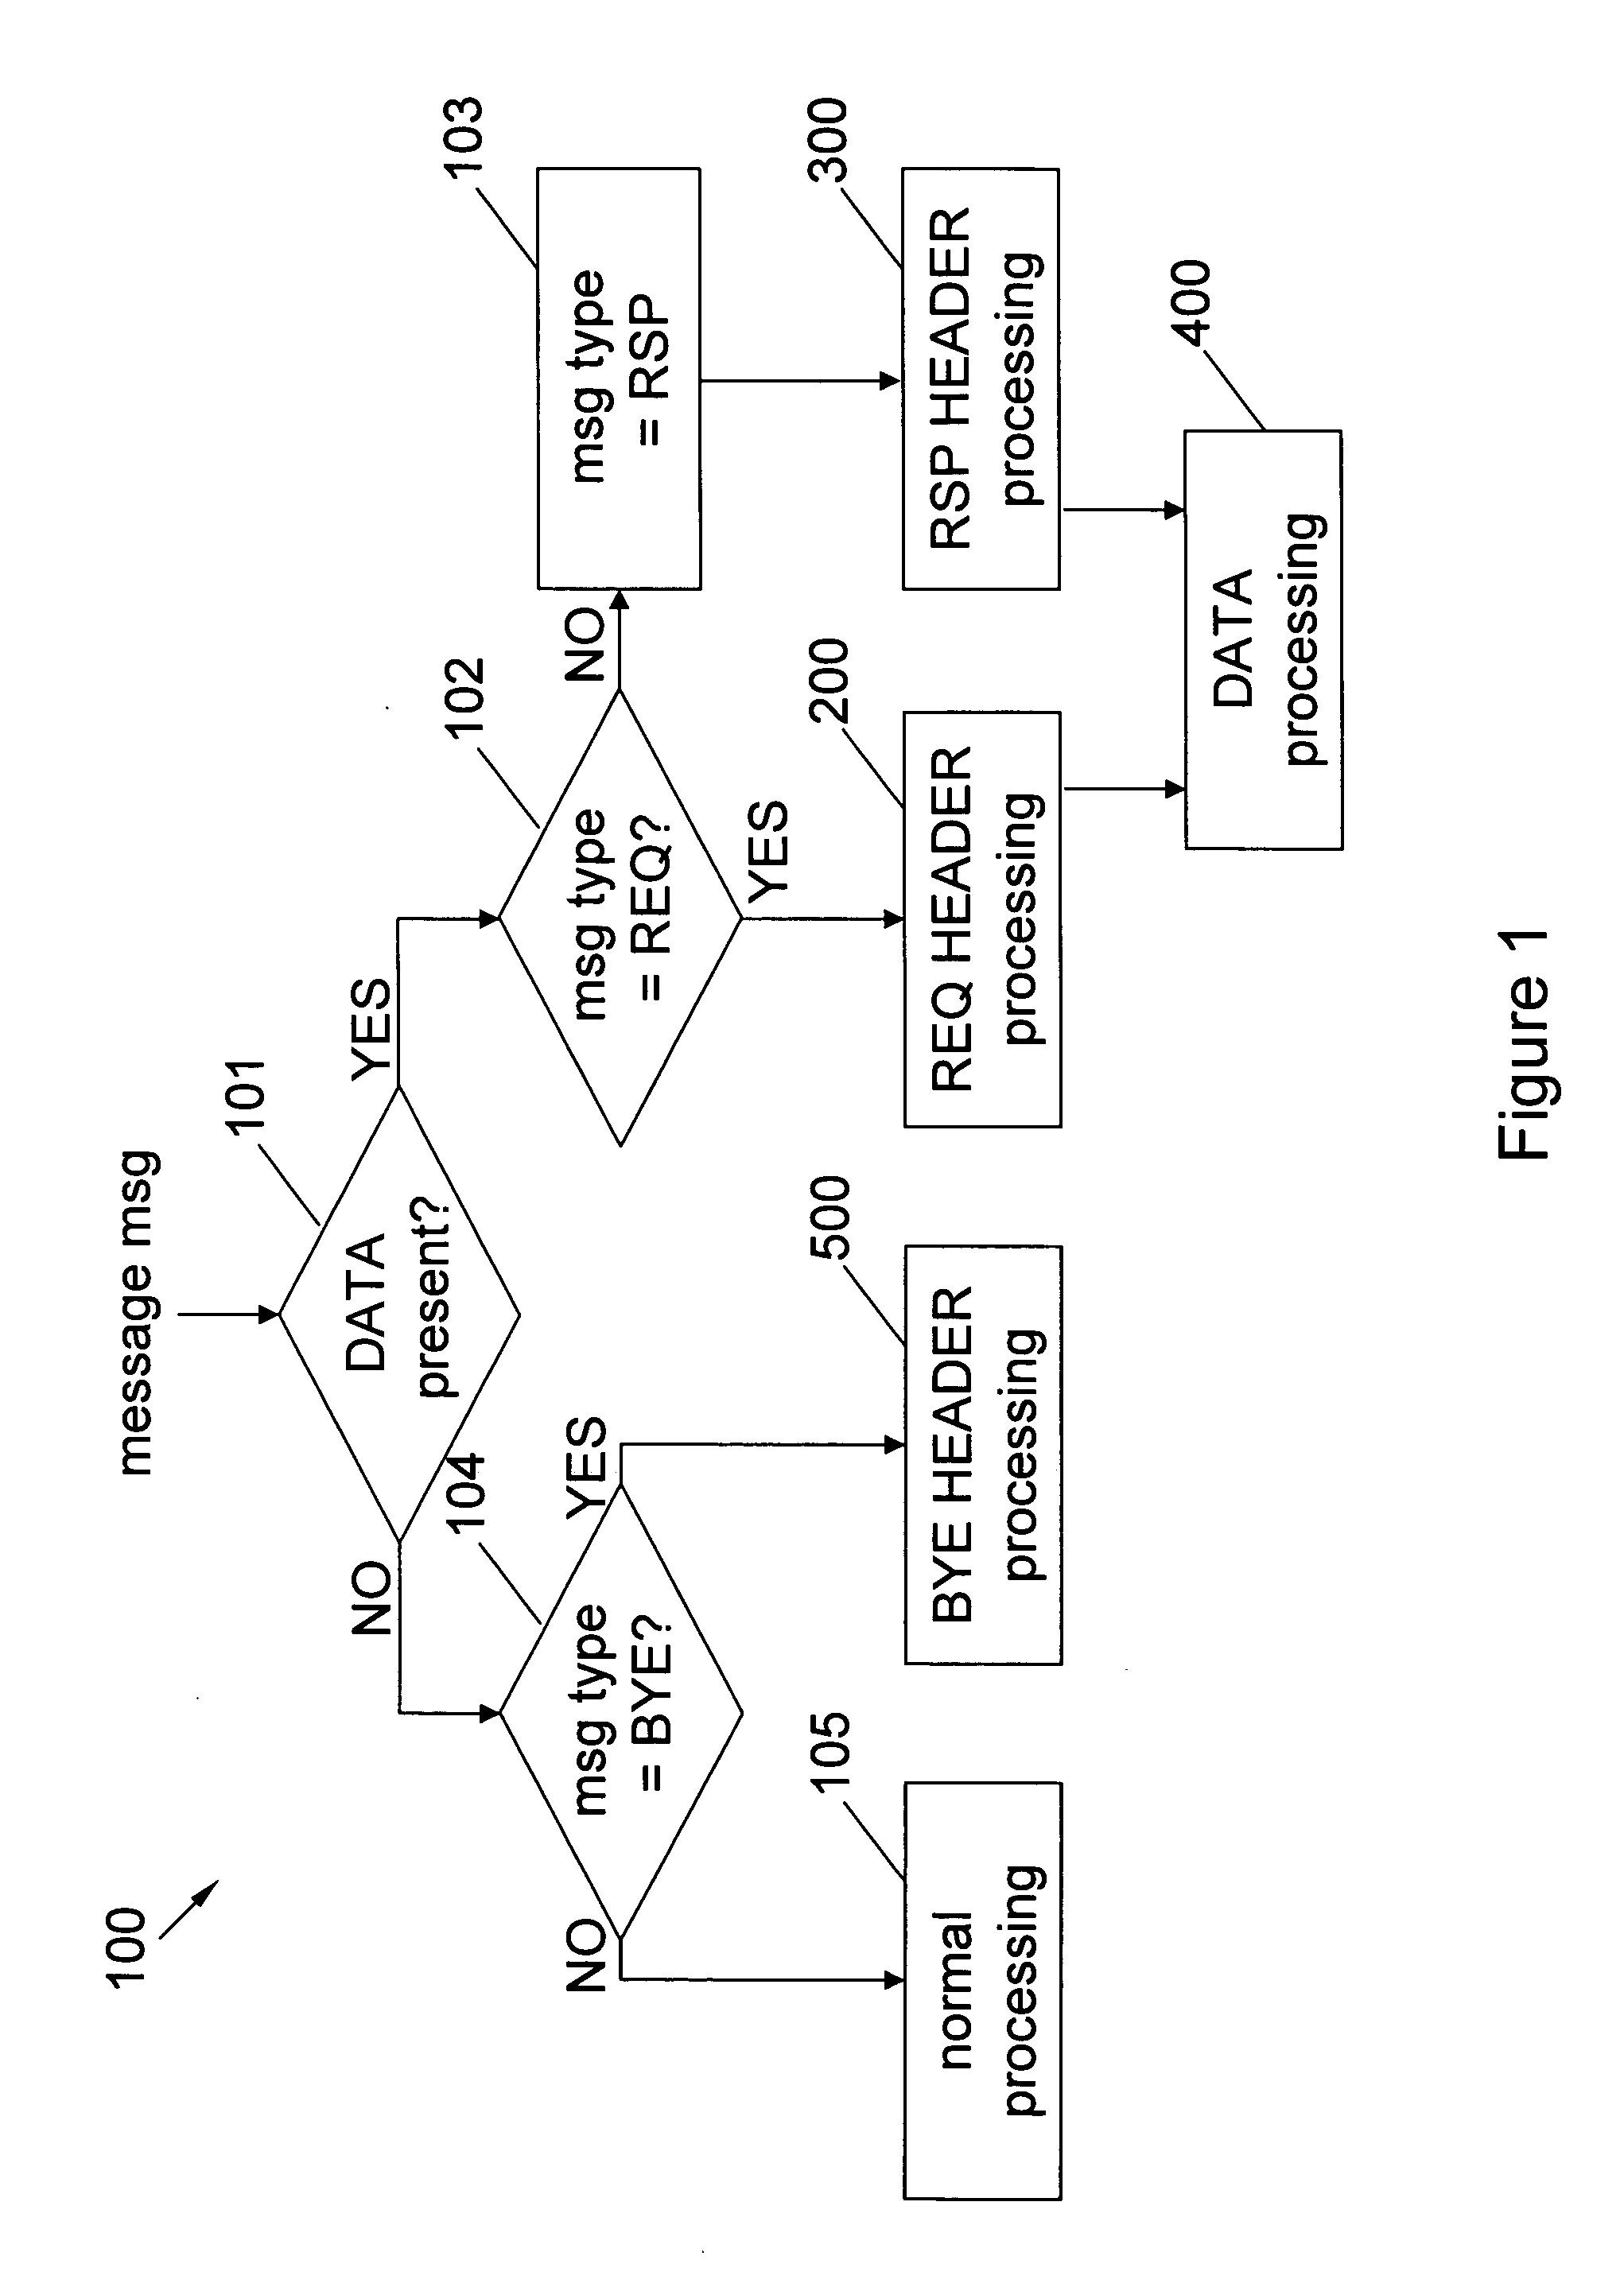 Compressing, filtering, and transmitting of protocol messages via a protocol-aware intermediary node